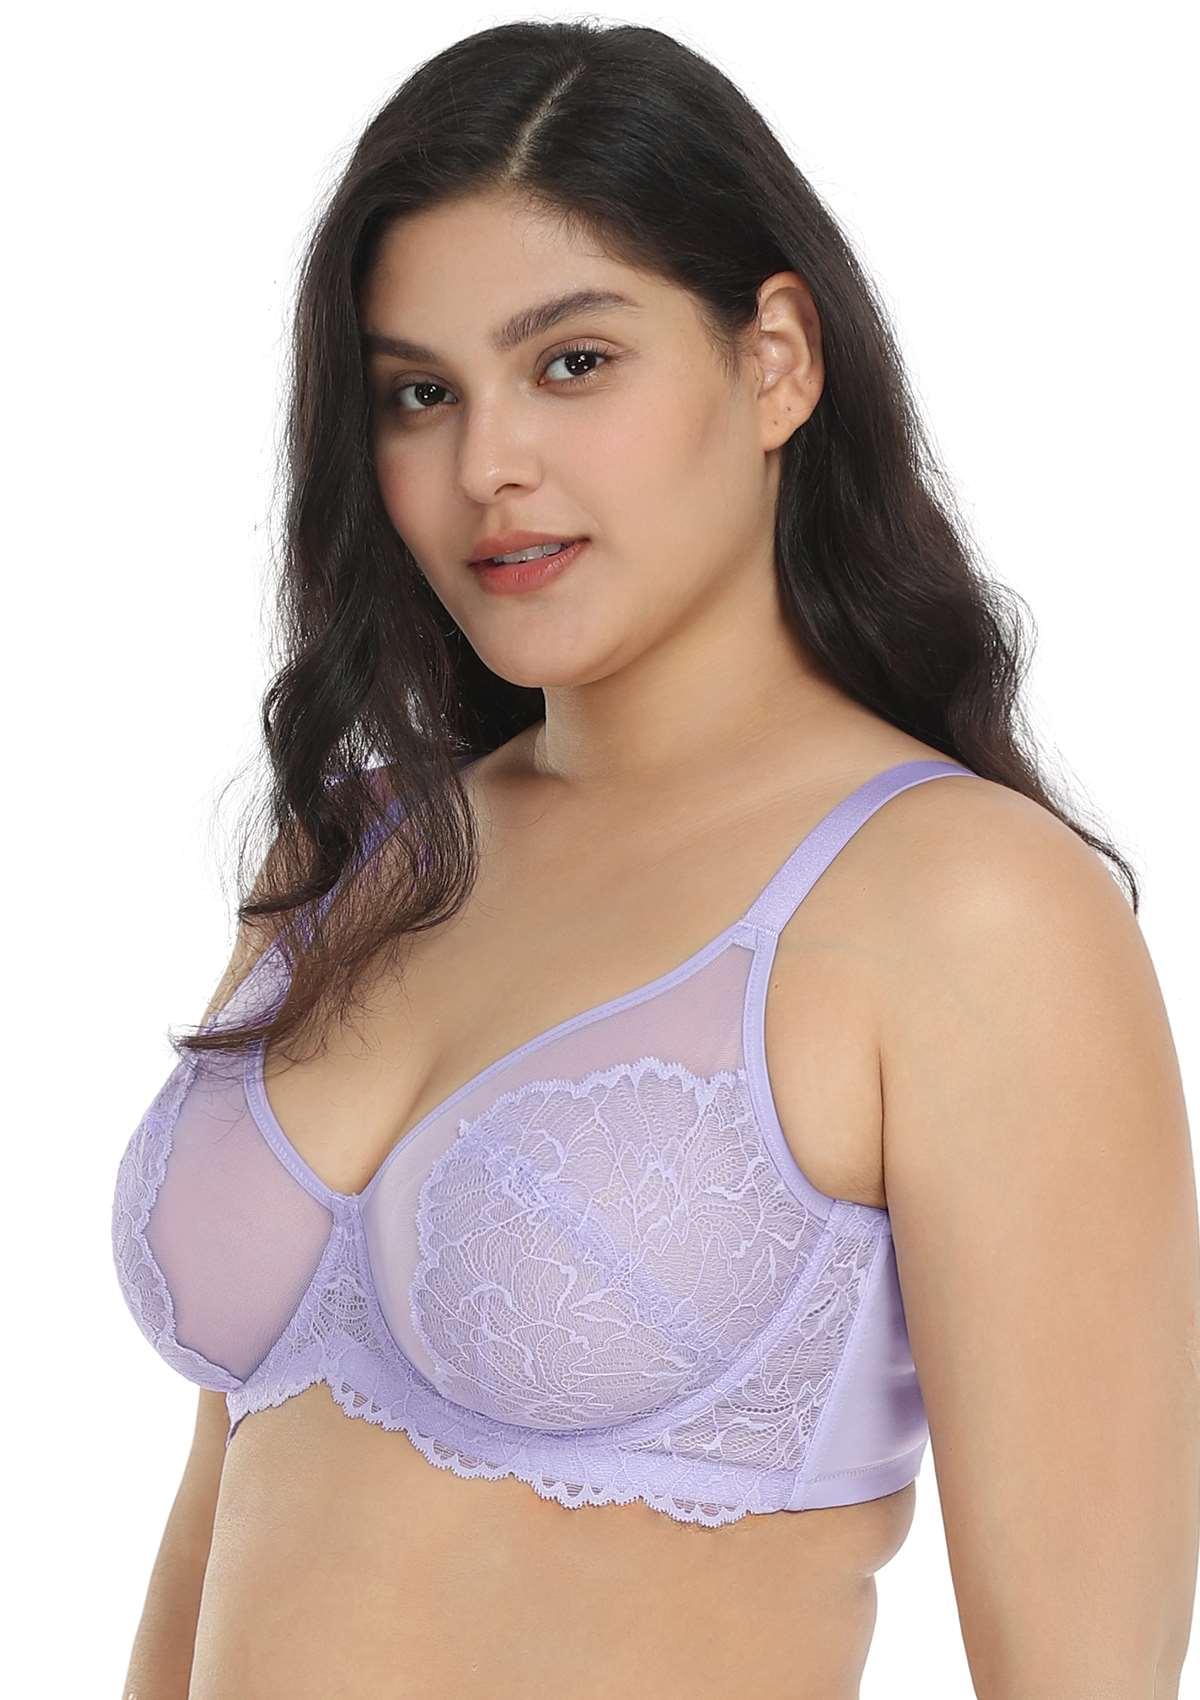 HSIA Blossom Transparent Lace Bra: Plus Size Wired Back Smoothing Bra - Light Purple / 36 / C